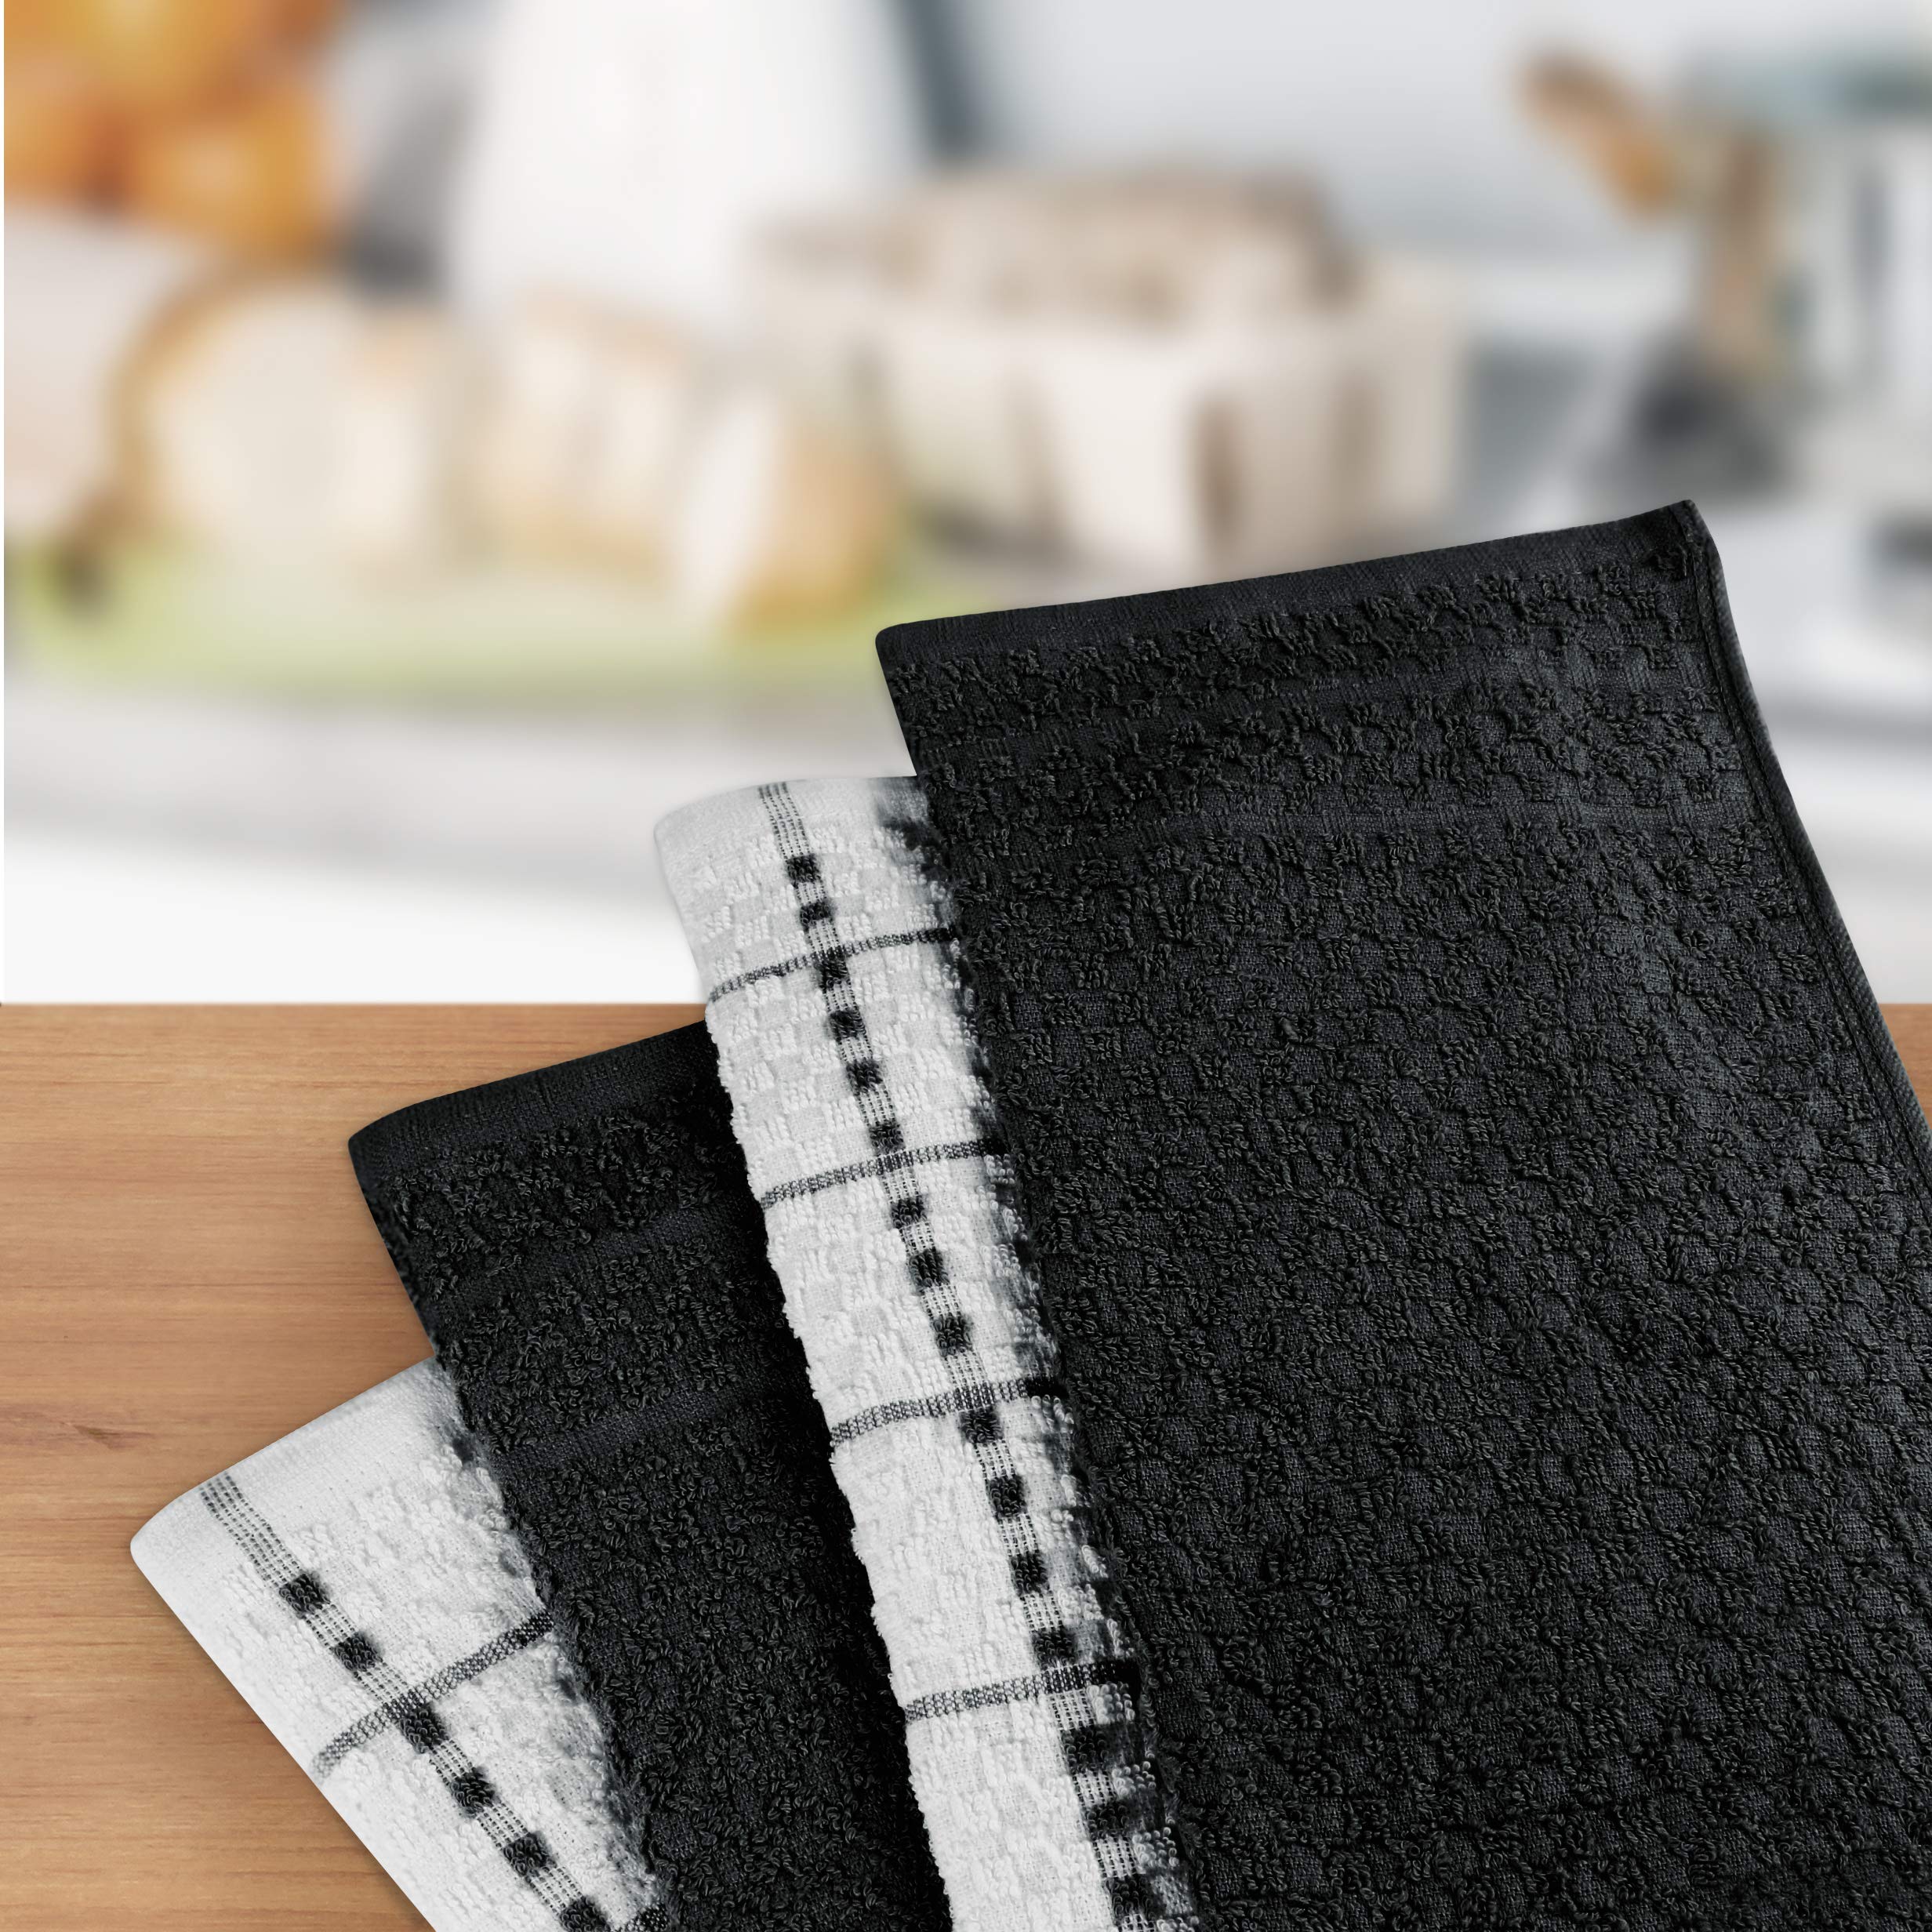 Utopia Towels Kitchen Towels, 15 x 25 Inches, 100% Ring Spun Cotton Super Soft and Absorbent Black Dish Towels, Tea Towels and B